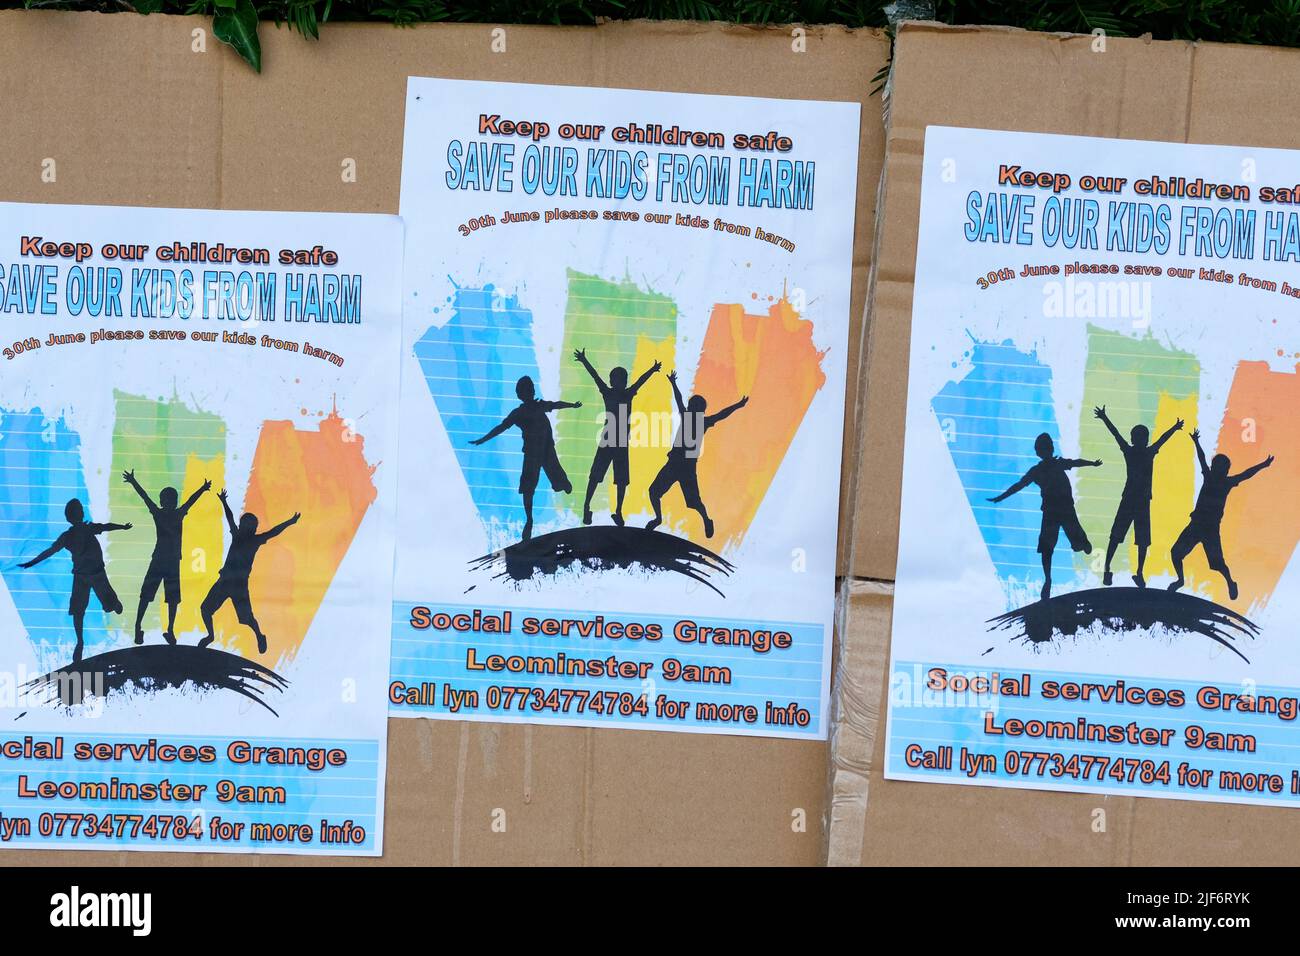 Leominster, Herefordshire, UK - Thursday 30th June 2022 - Protest posters at a protest against the Children's Service department at Herefordshire Council following a critical Ofsted report and a High Court judgement critical of the local authorities Children's Services dept managers and social workers. Photo Steven May / Alamy Live News Stock Photo